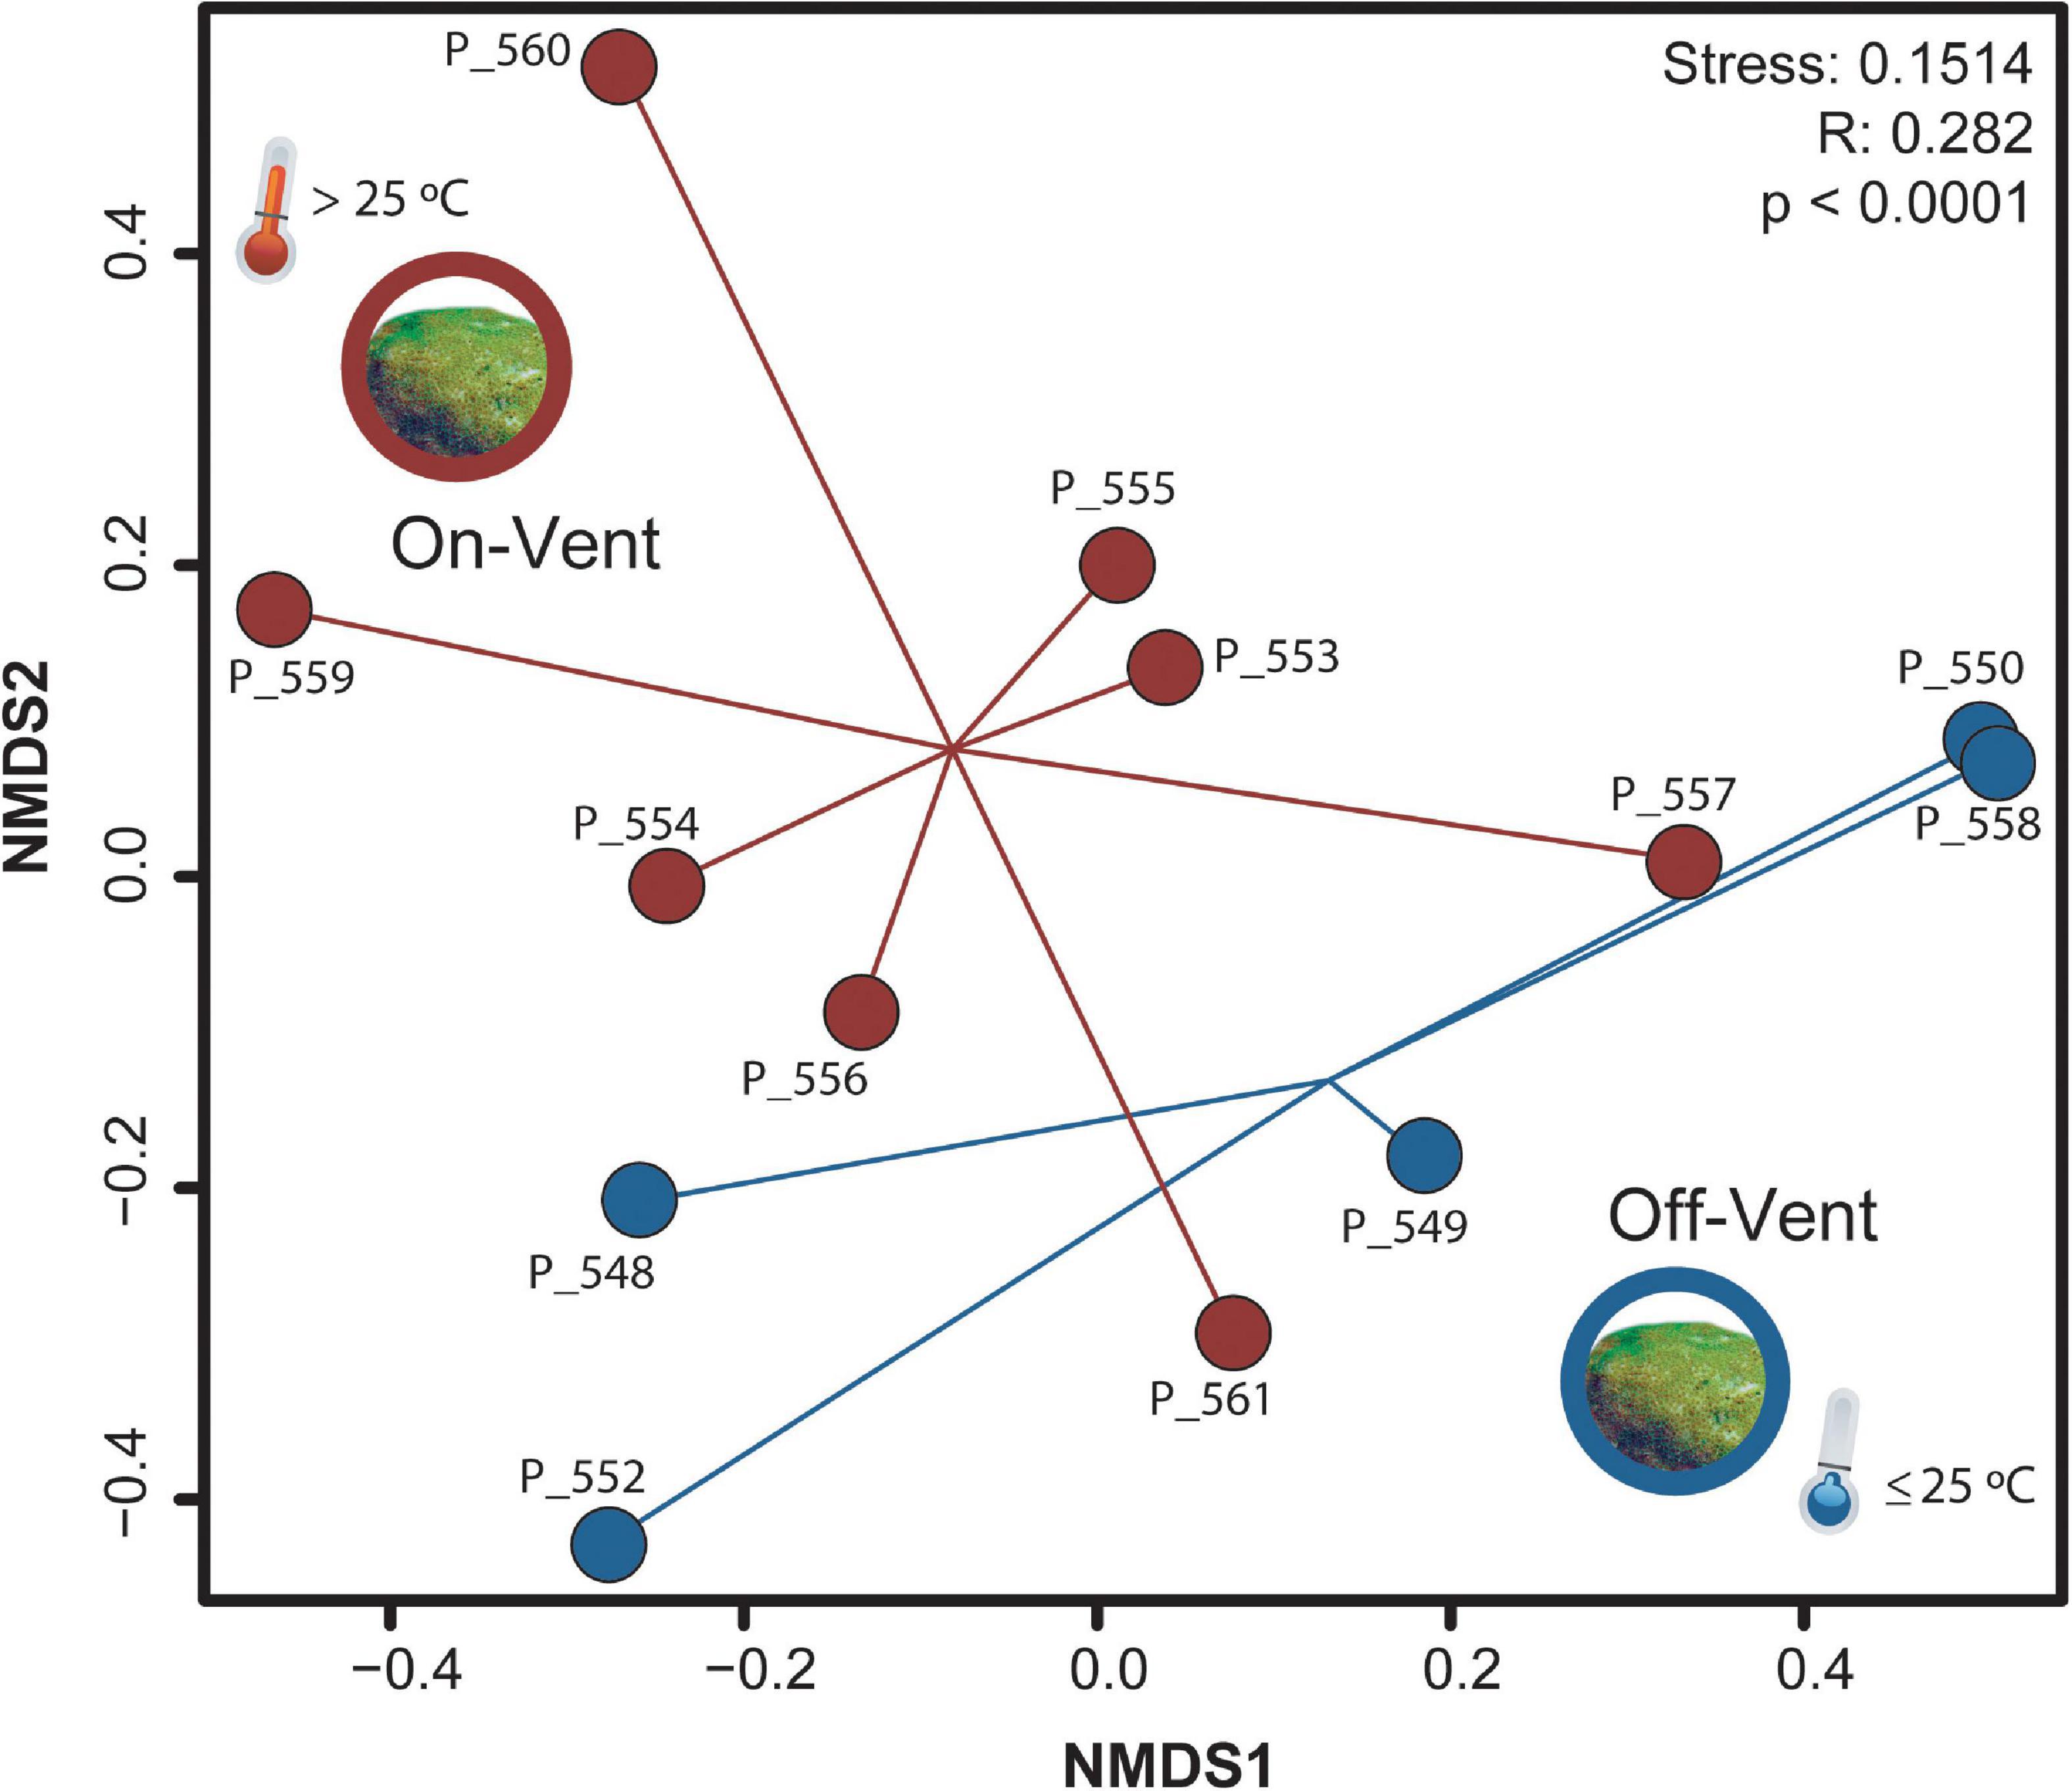 Enzyme adaptation to habitat thermal legacy shapes the thermal plasticity  of marine microbiomes